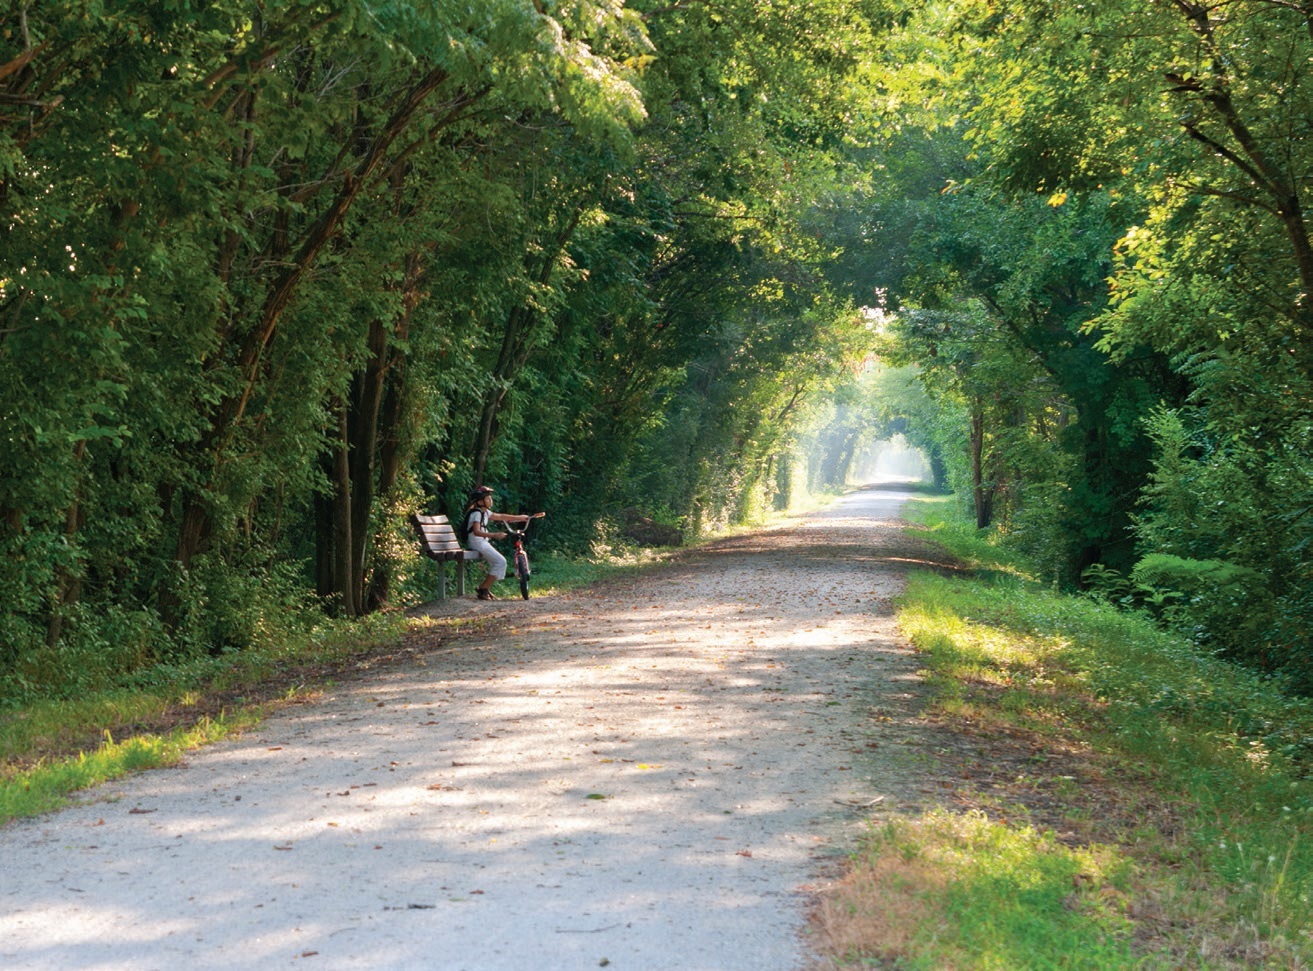 Soak in the sunshine on the Katy Trail this spring. PHOTO: BY ISTOCK.COM